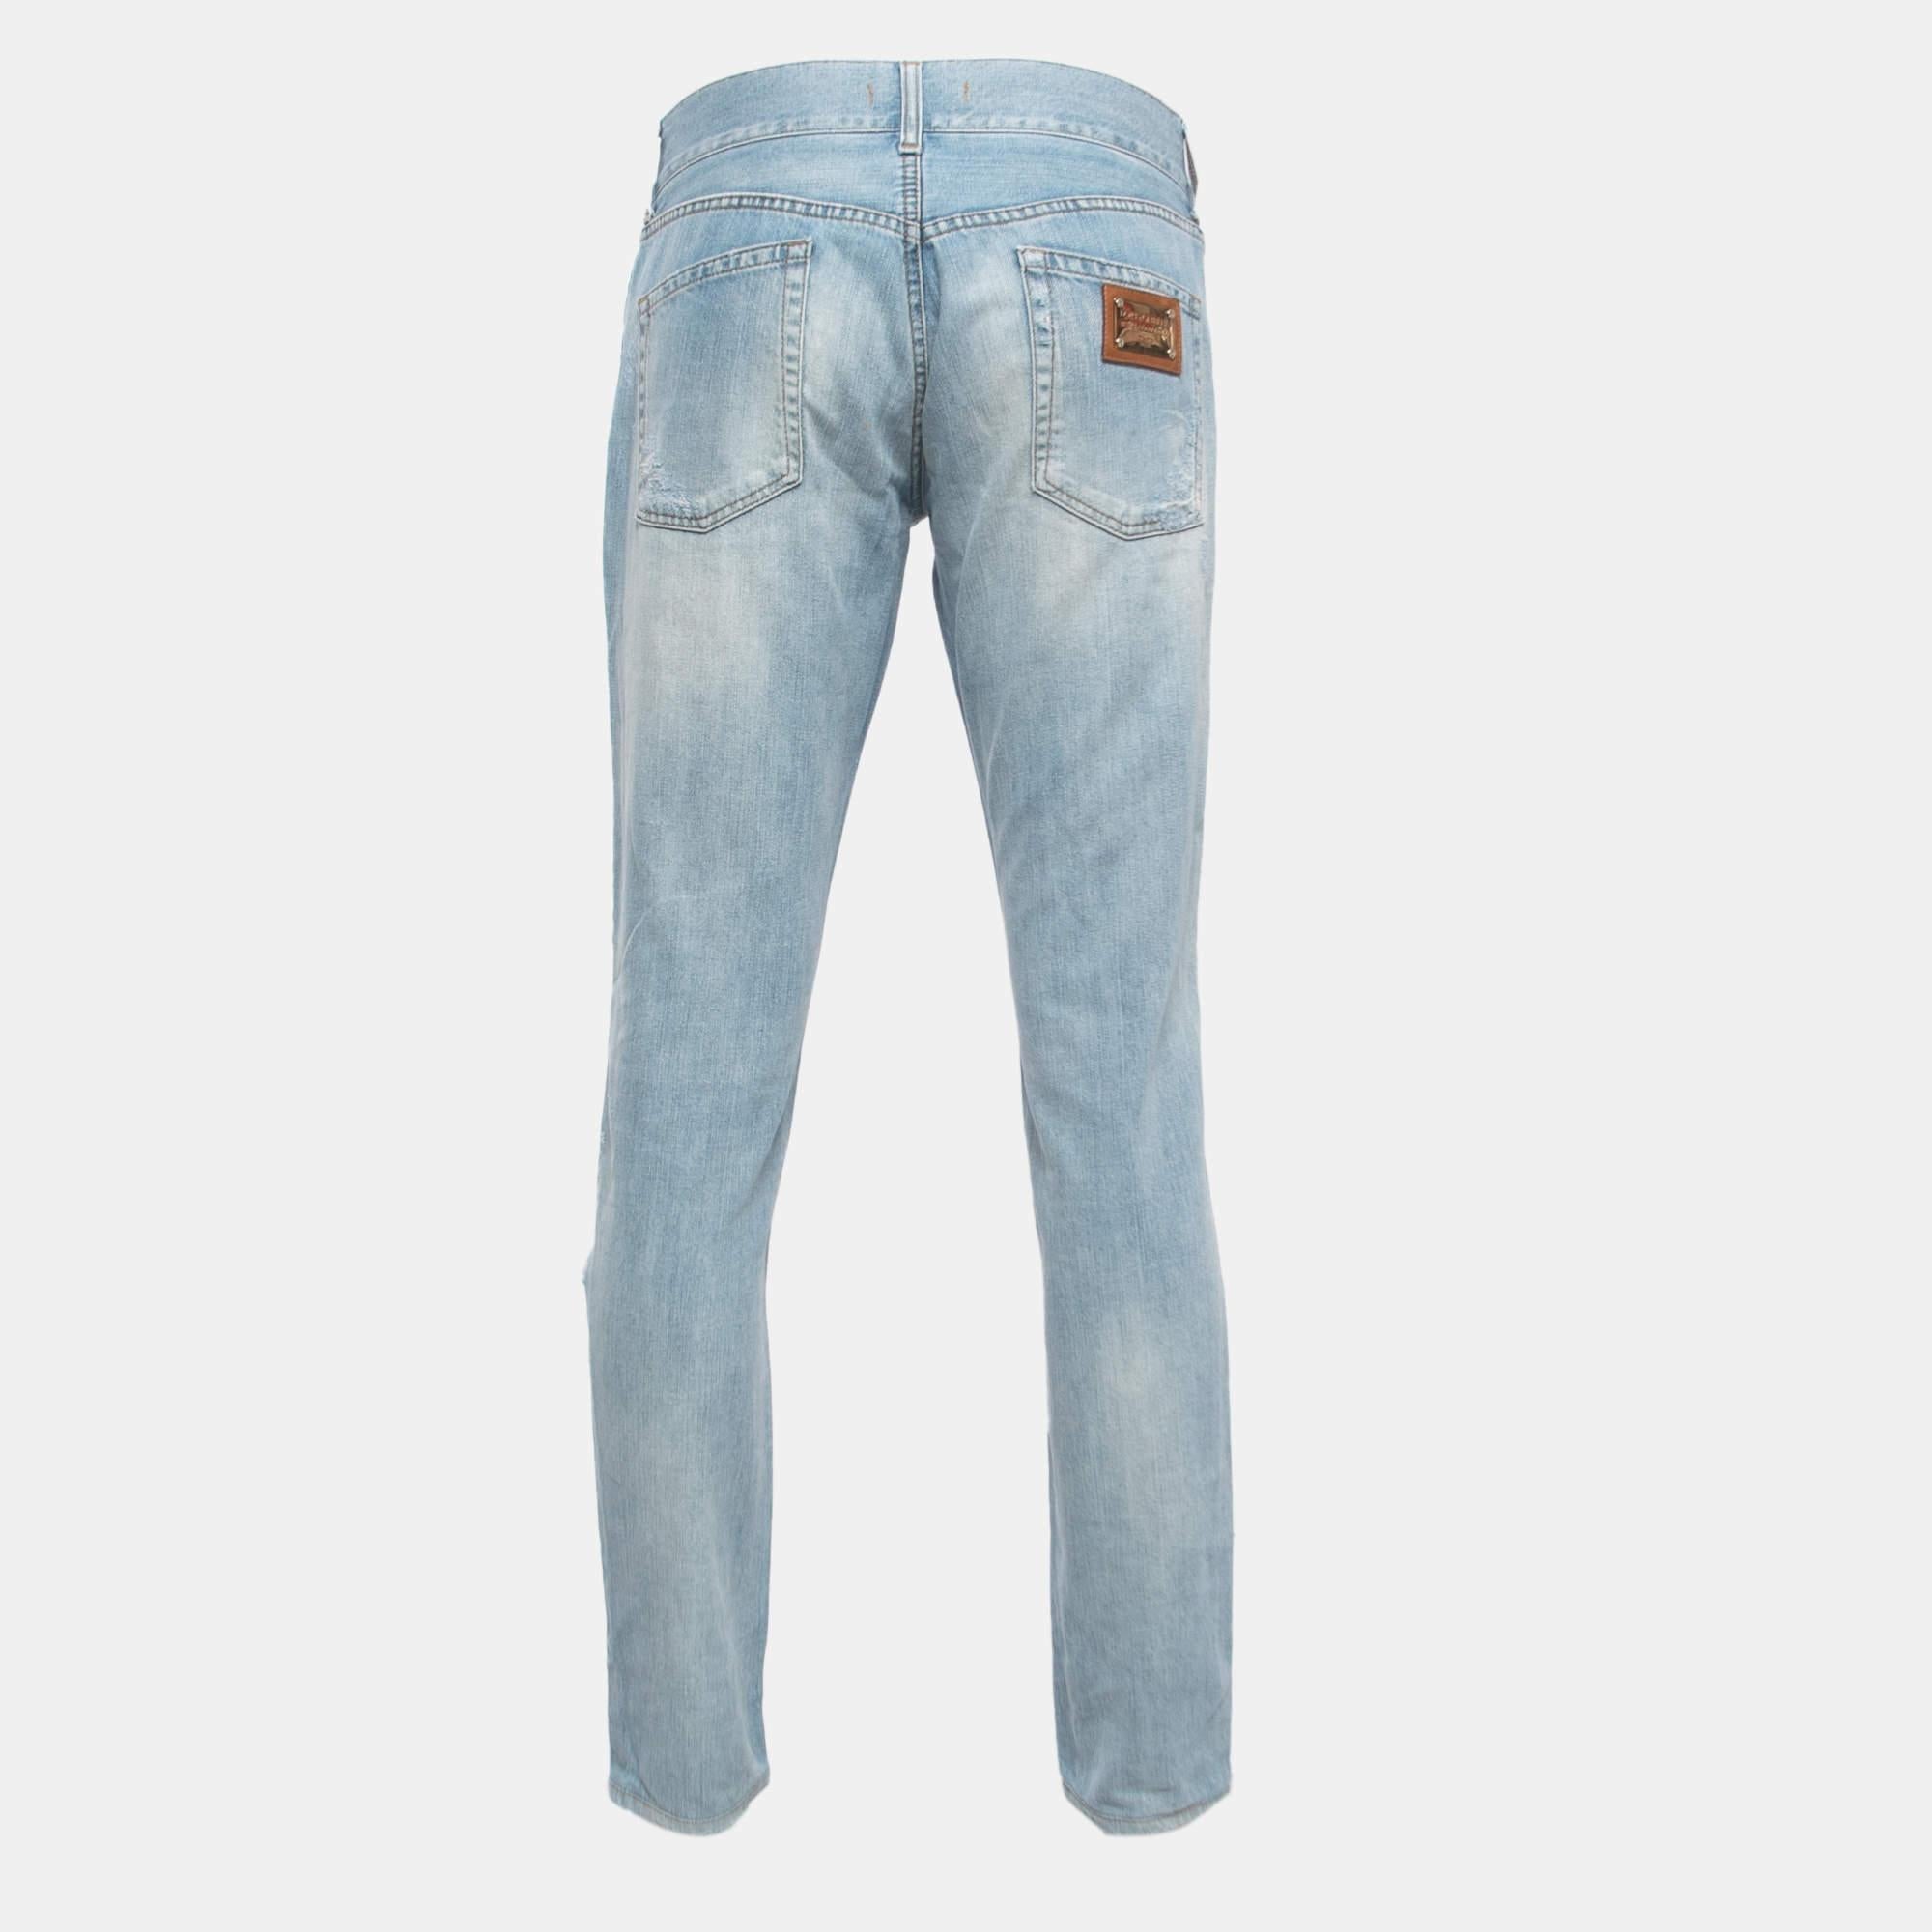 Impeccably tailored jeans are a staple in a well-curated wardrobe. These designer jeans are finely sewn to give you the desired look and all-day comfort.

